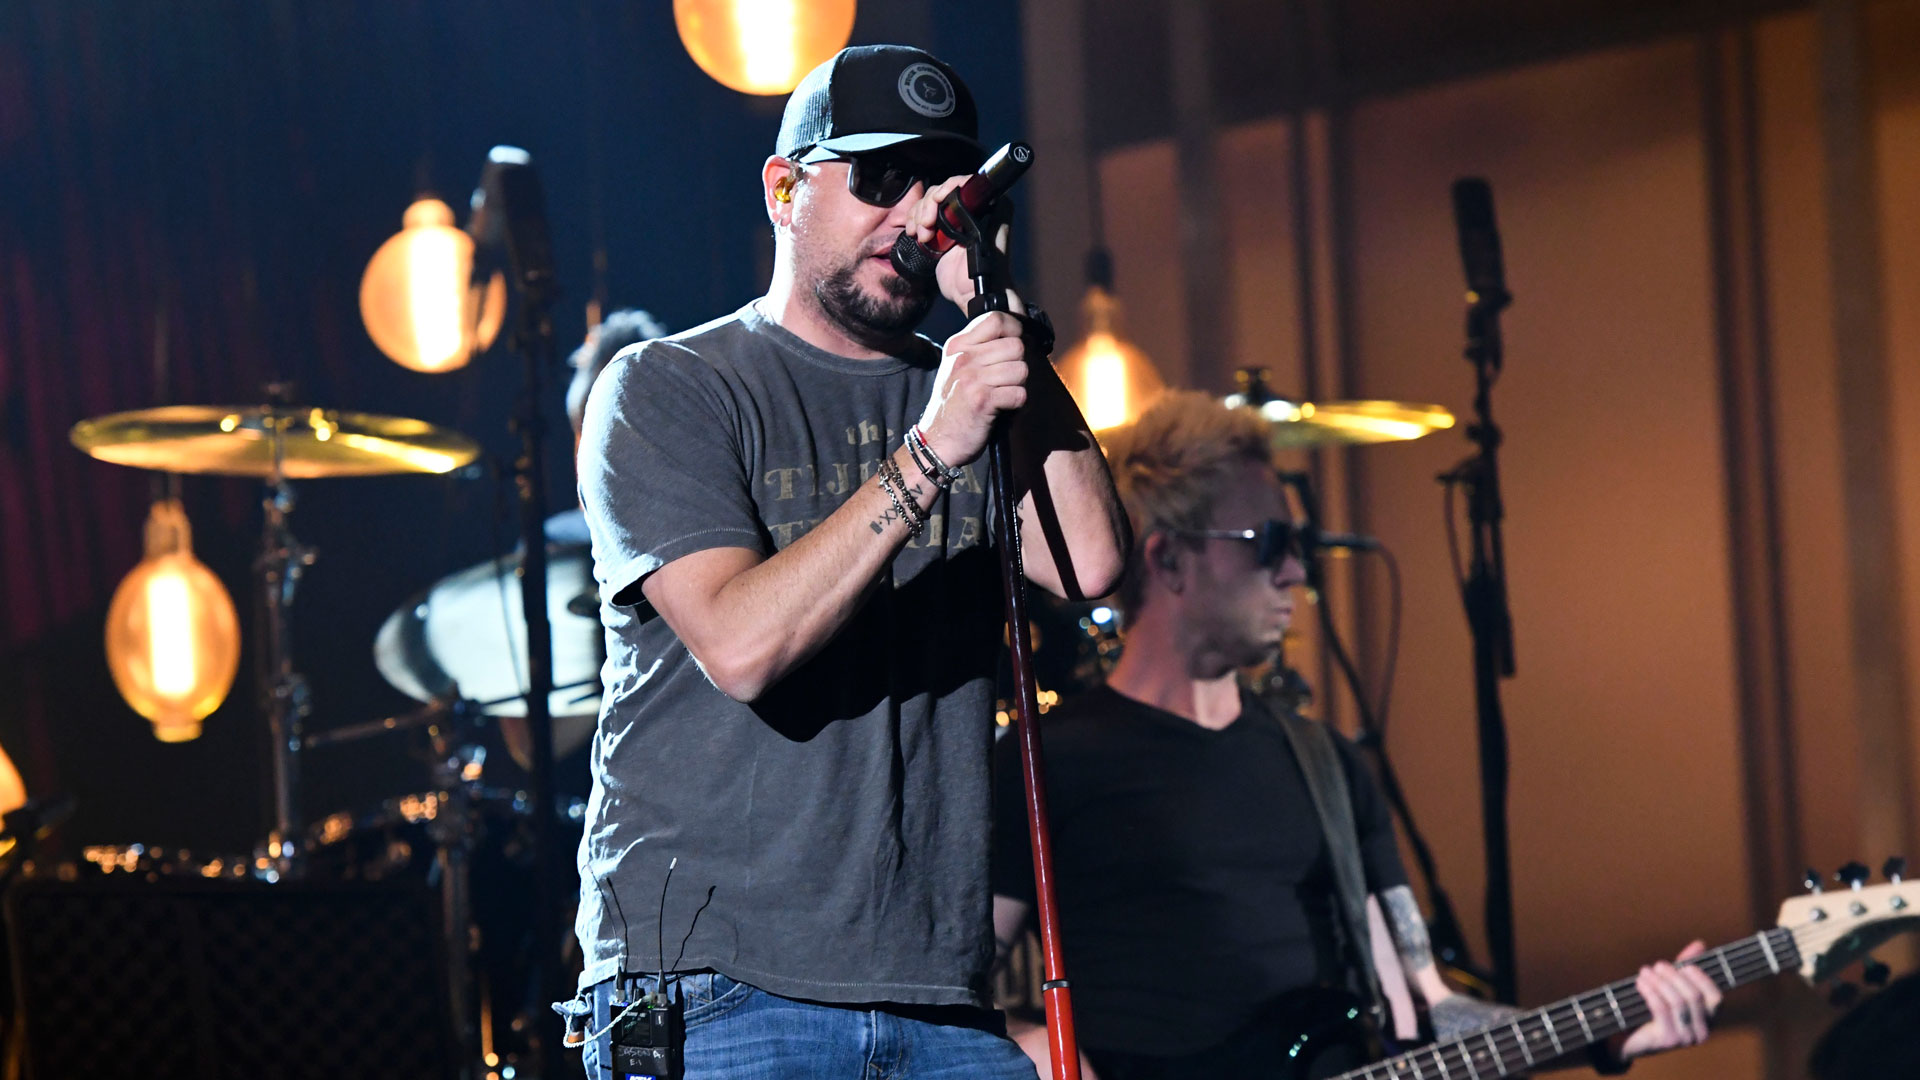 Jason Aldean sports some shades under the bright lights at MGM Grand Garden Arena in Vegas.